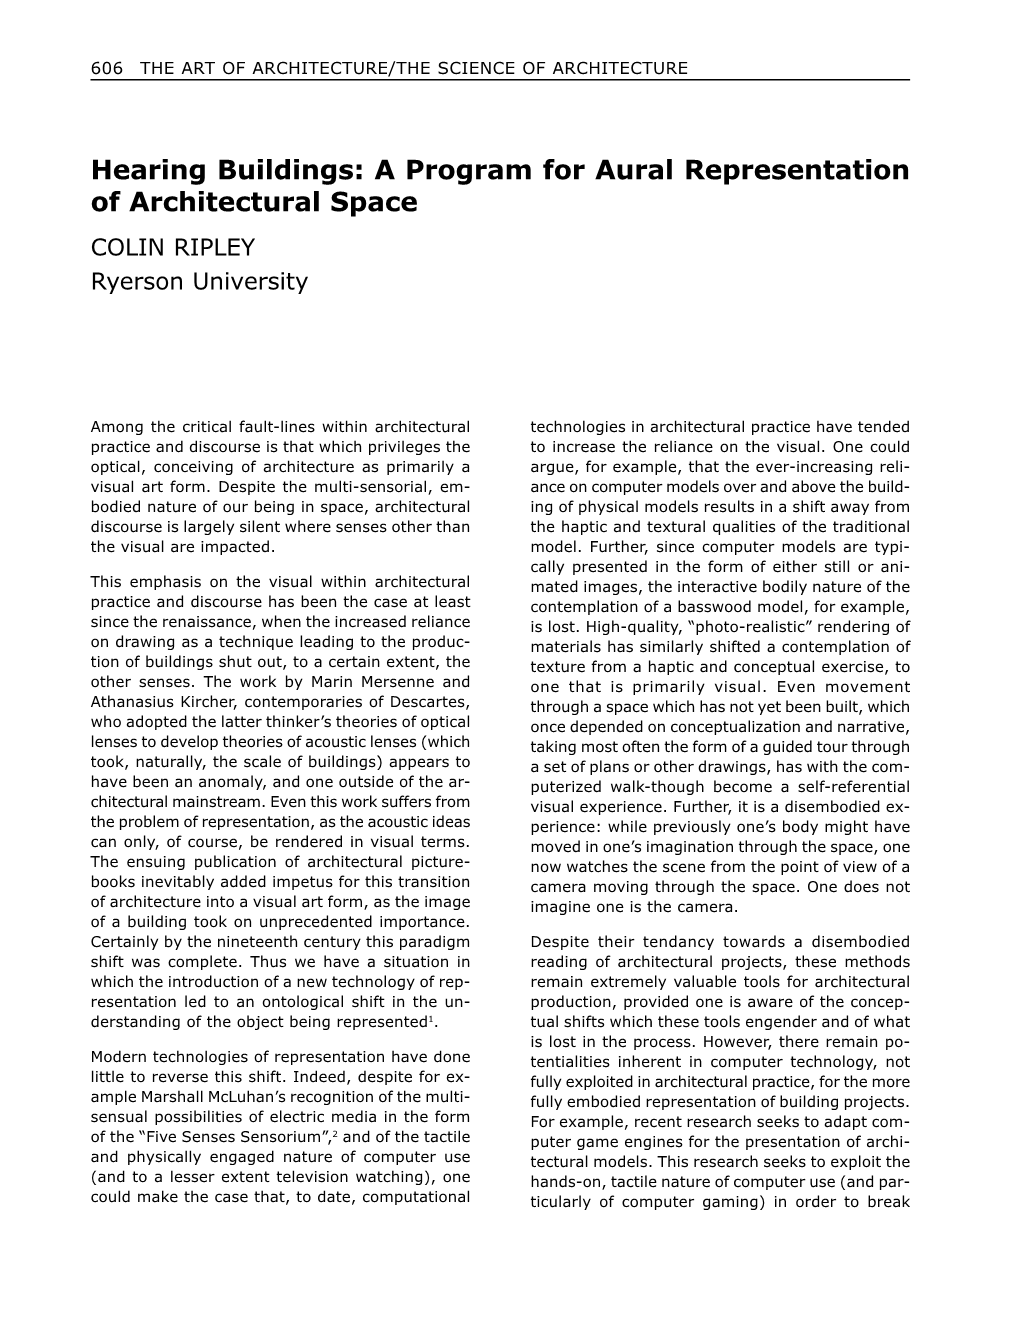 Hearing Buildings: a Program for Aural Representation of Architectural Space COLIN RIPLEY Ryerson University